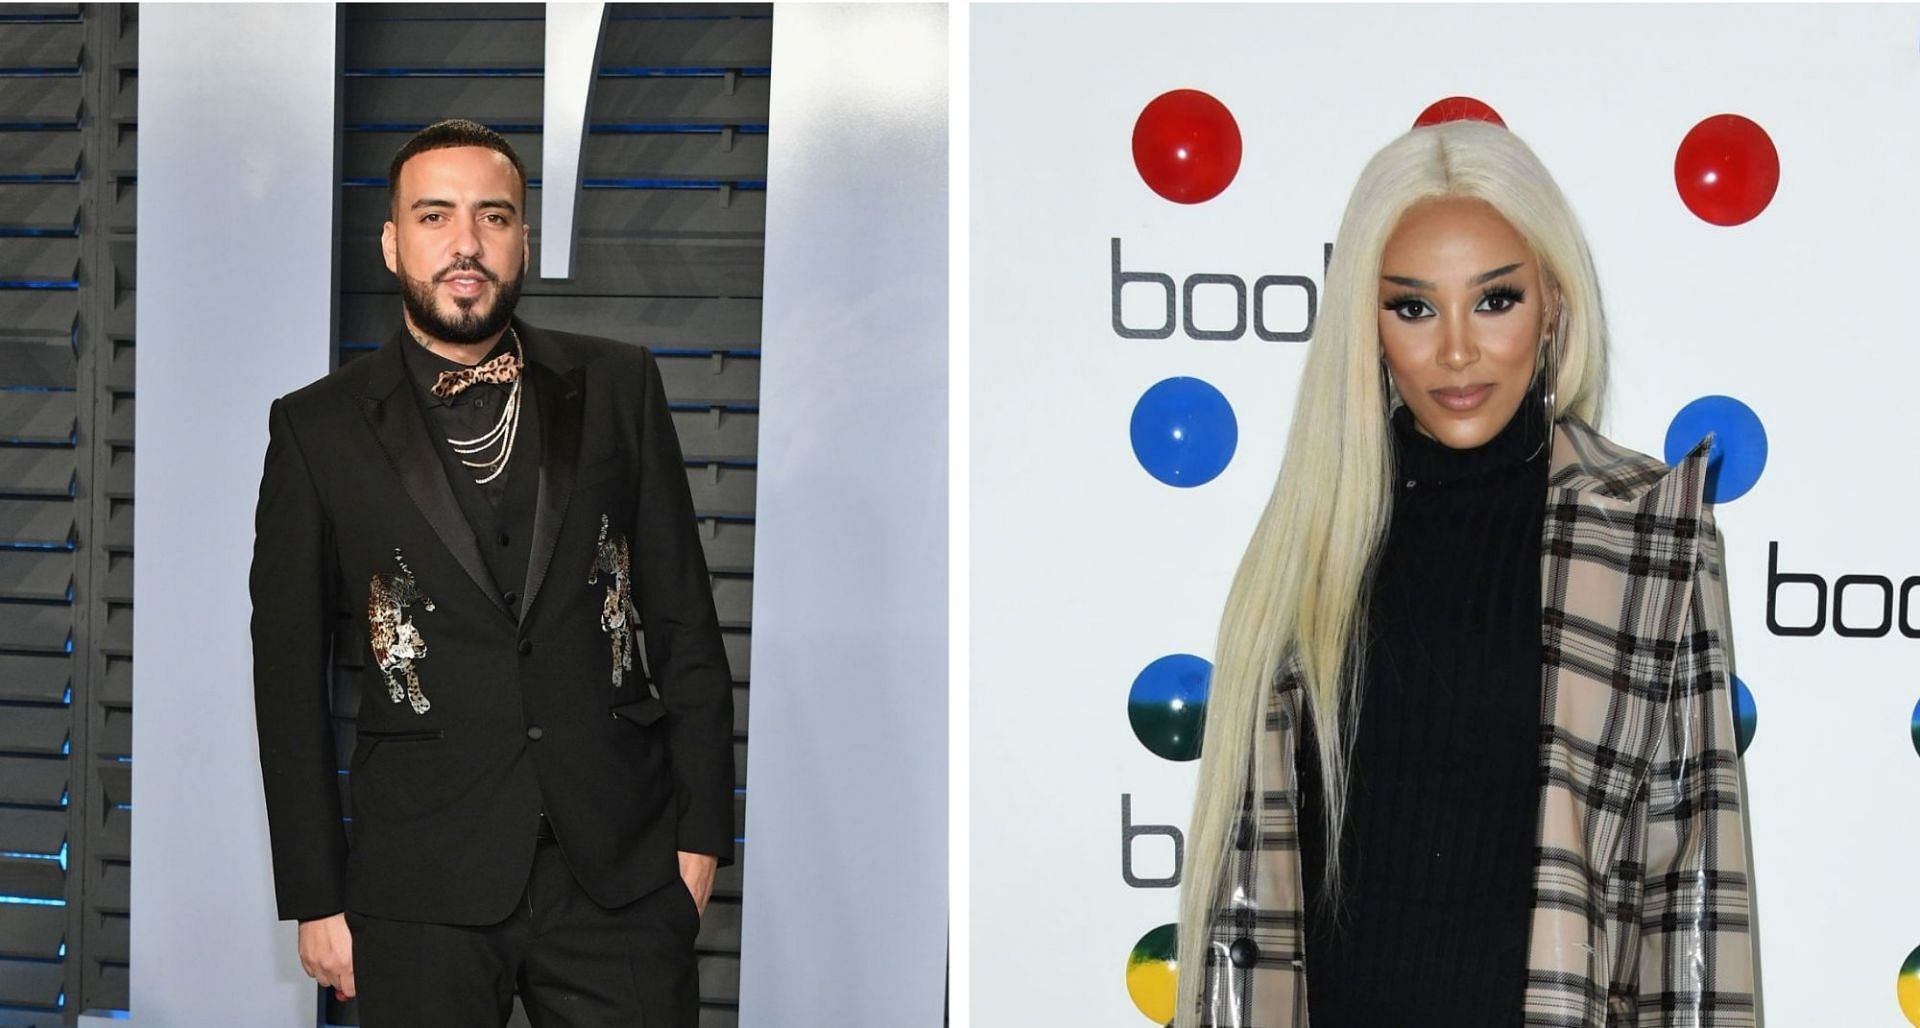 French Montana and Doja Cat sparked romance rumors once again (Image via Dia Dipasupil and Jon Kopaloff/Getty Images)